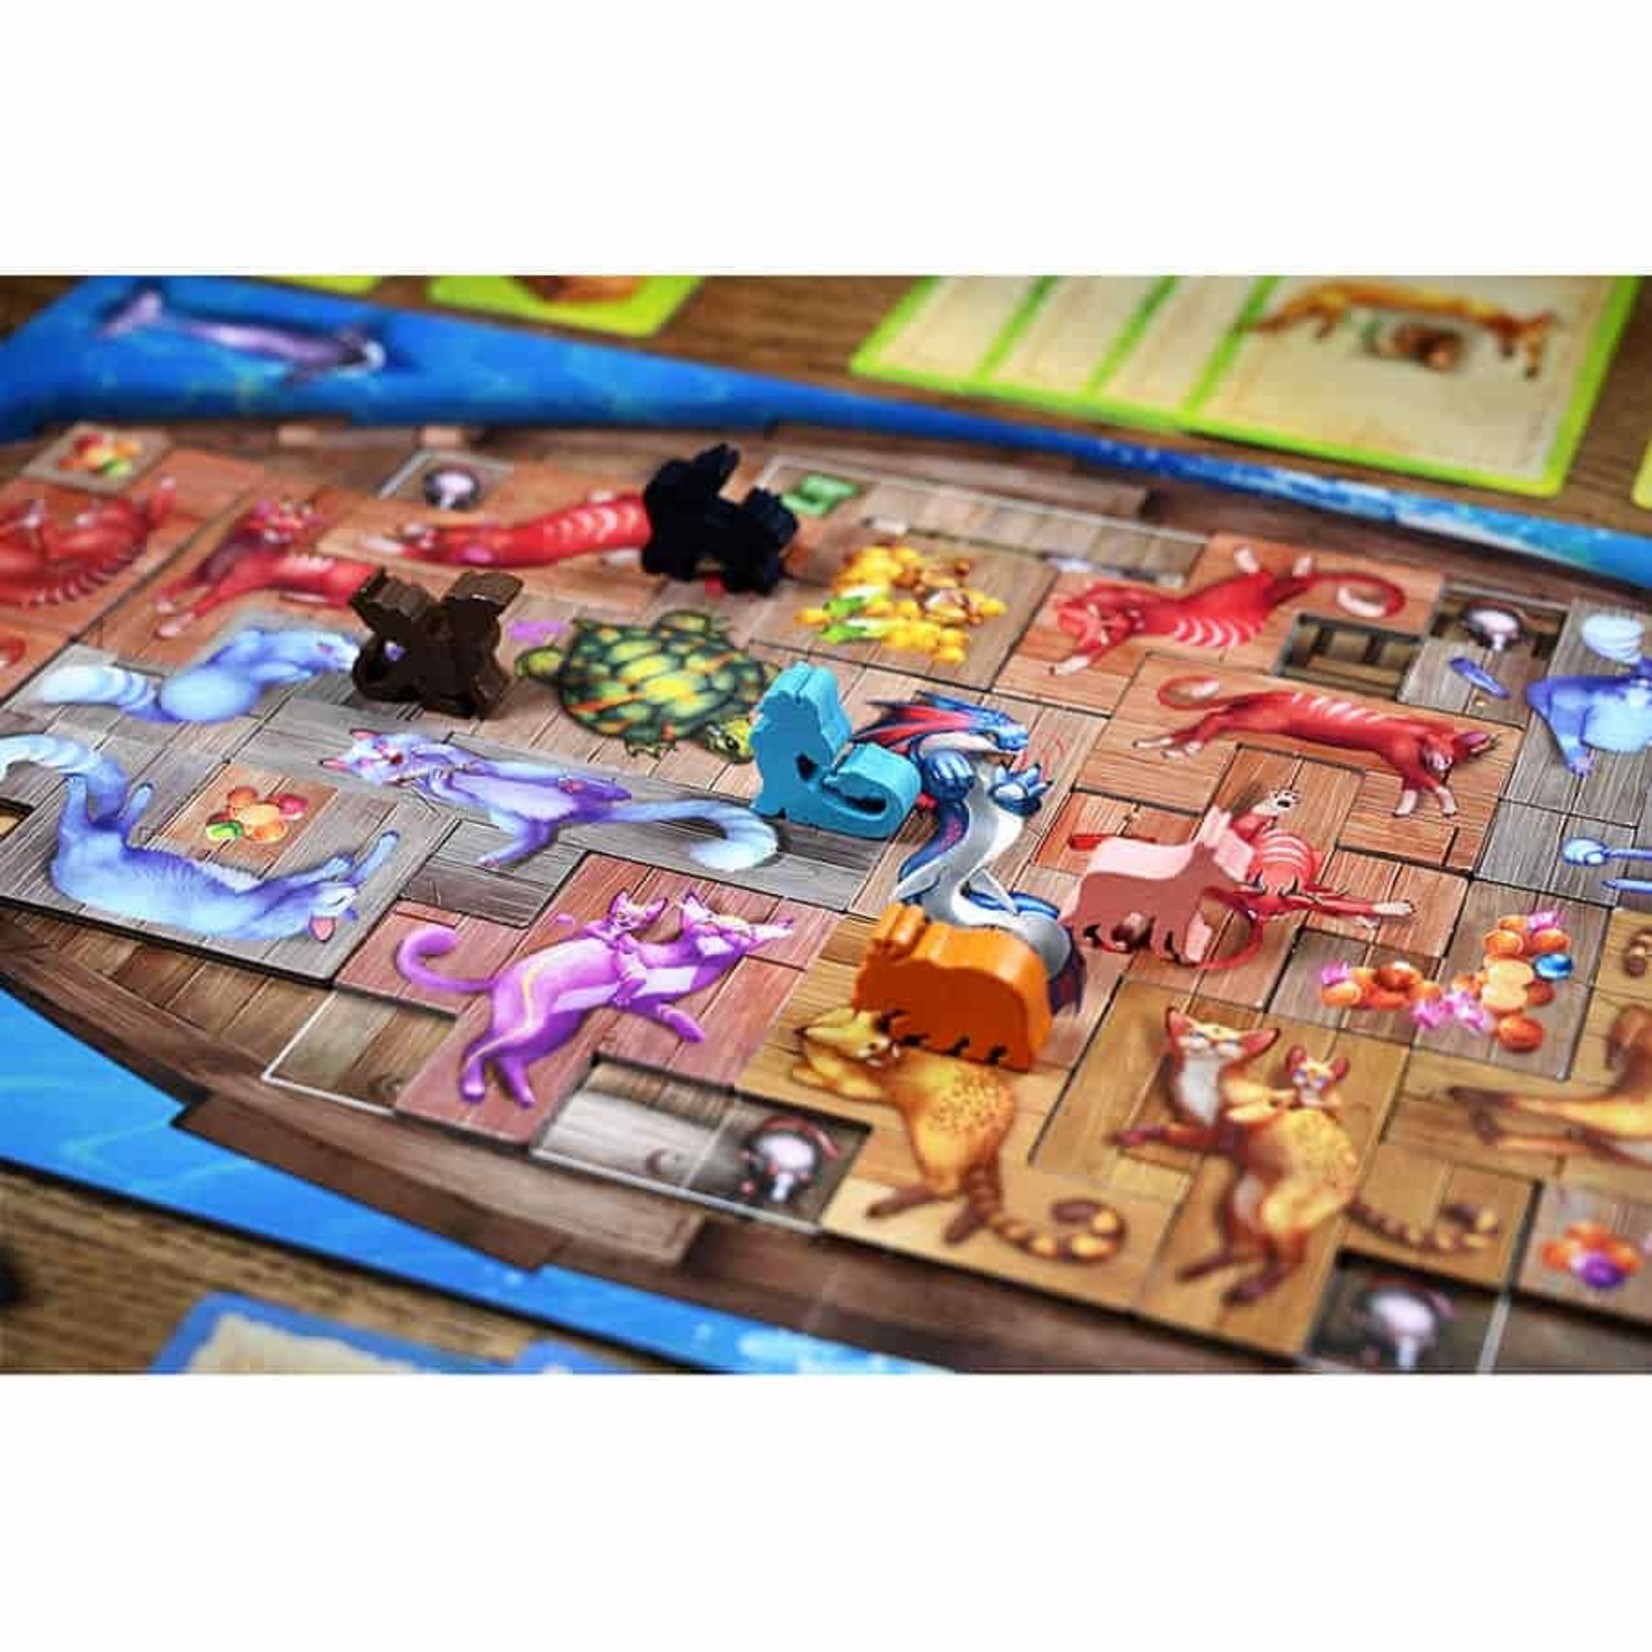 City of Games The Isle of Cats: Kittens + Beasts Expansion